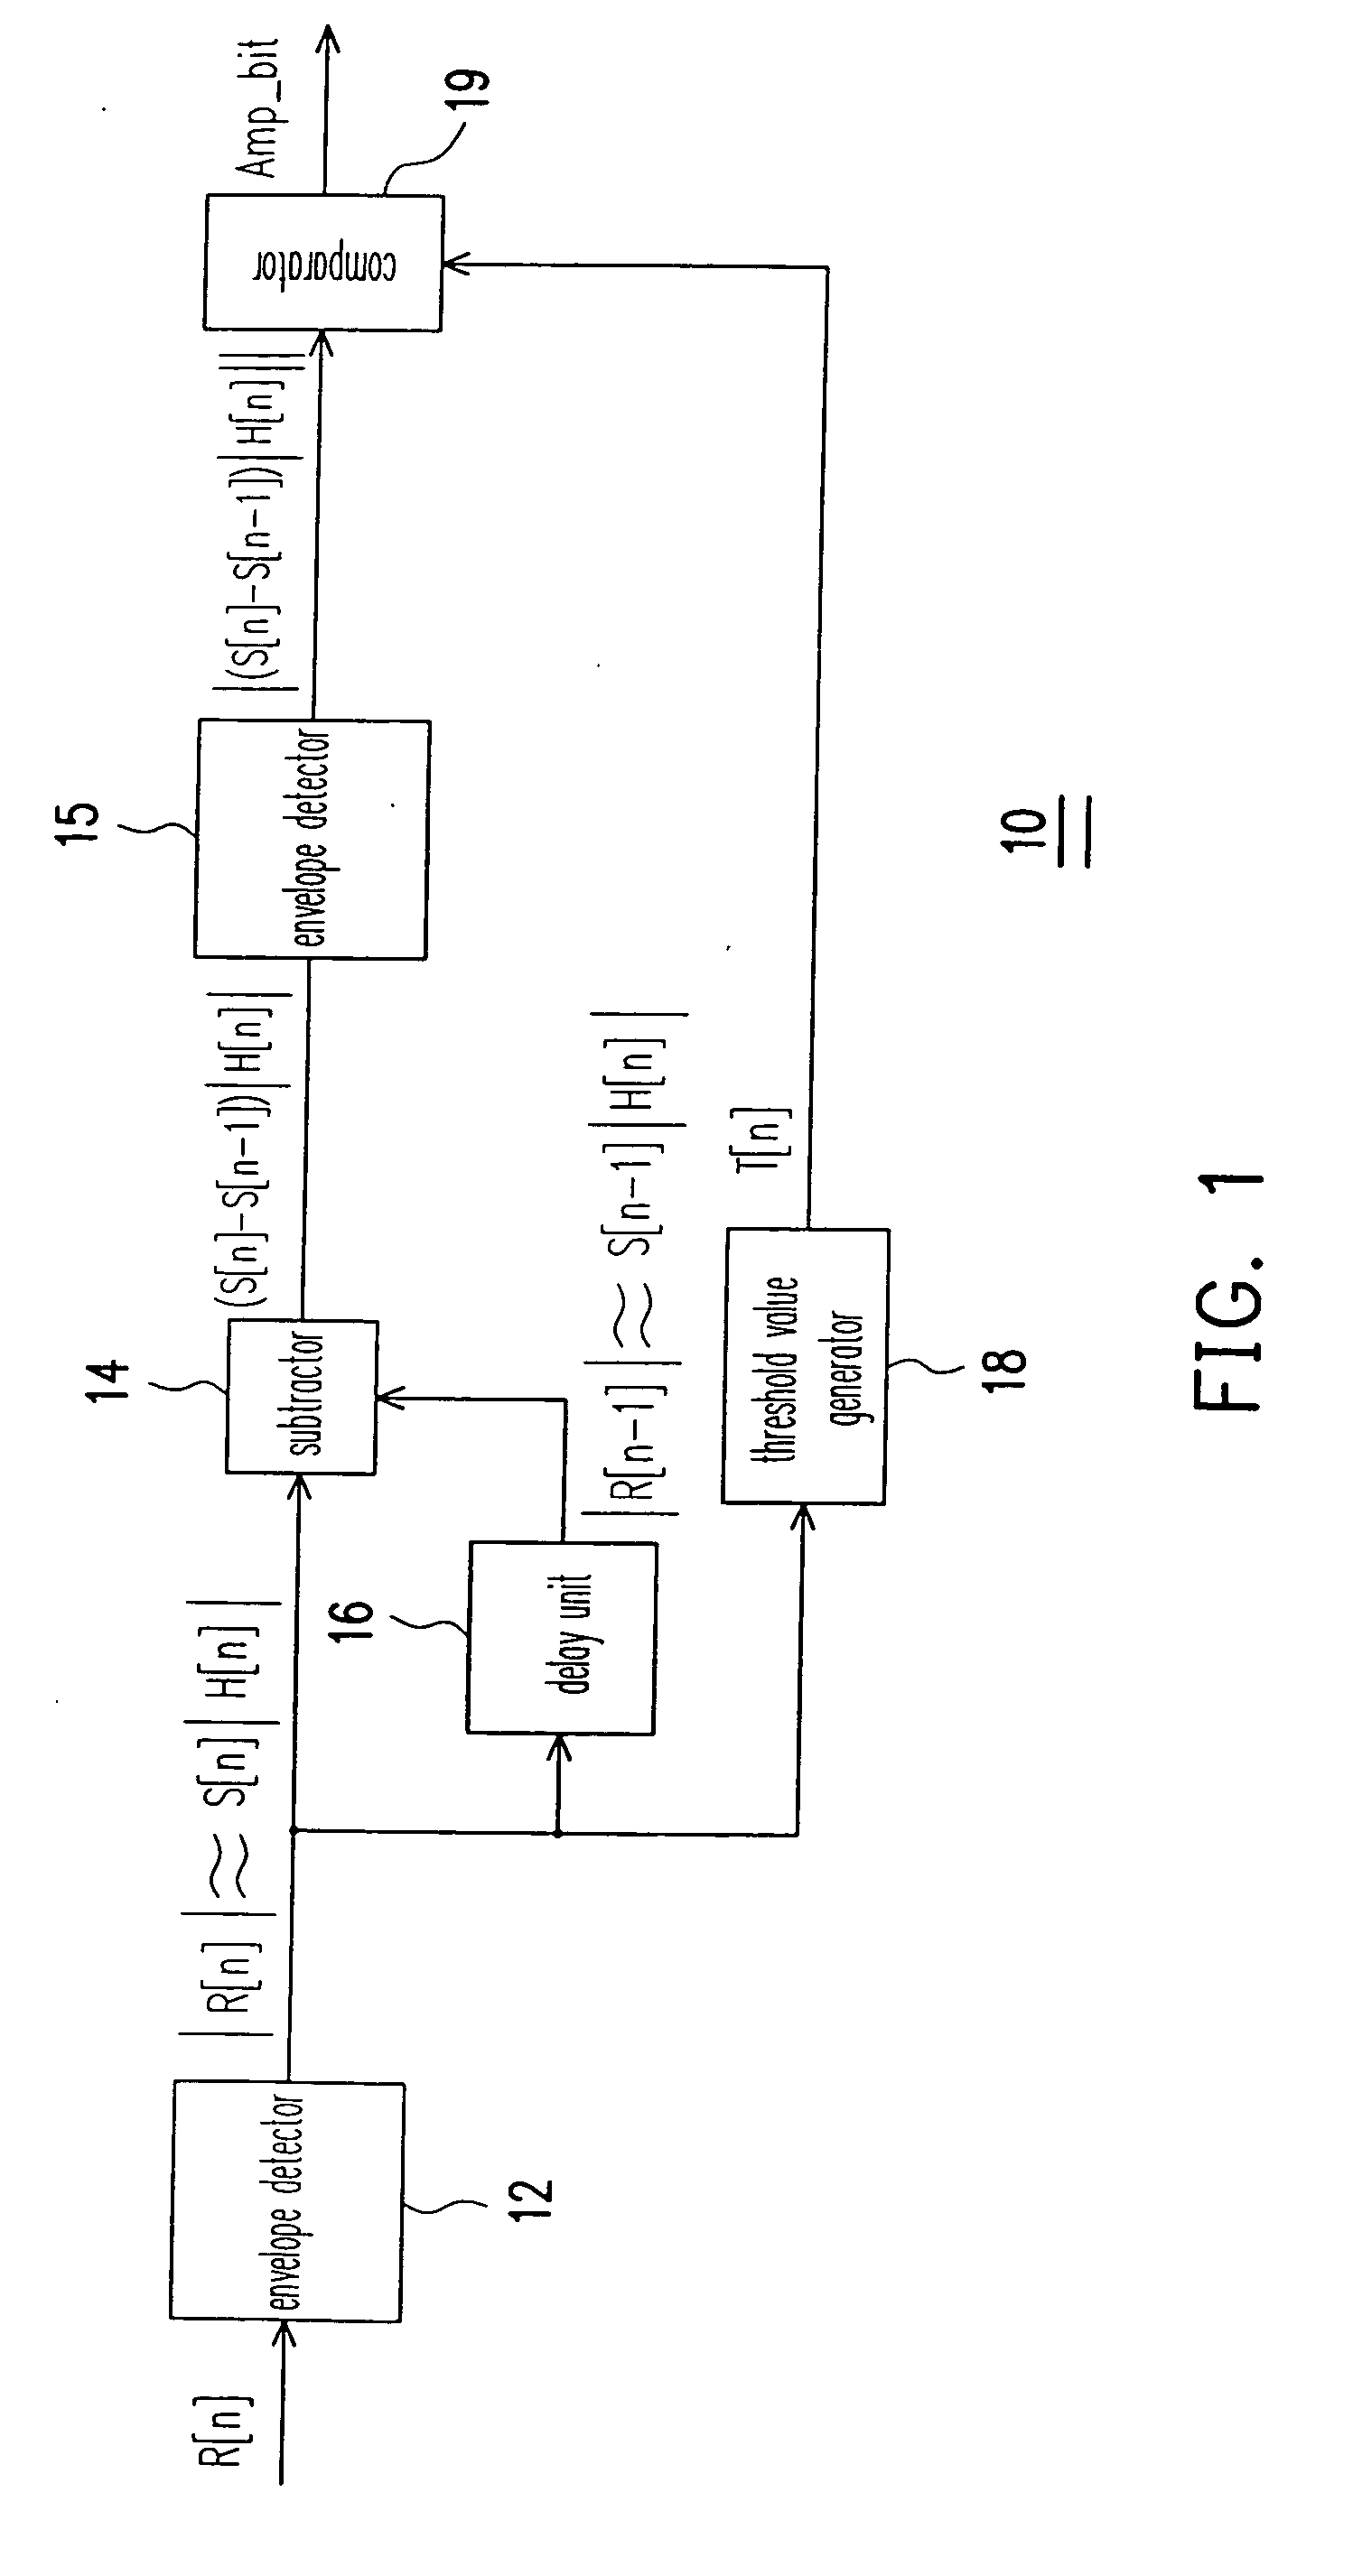 Communication system with demodulation of two-level differential amplitude-shift-keying signals